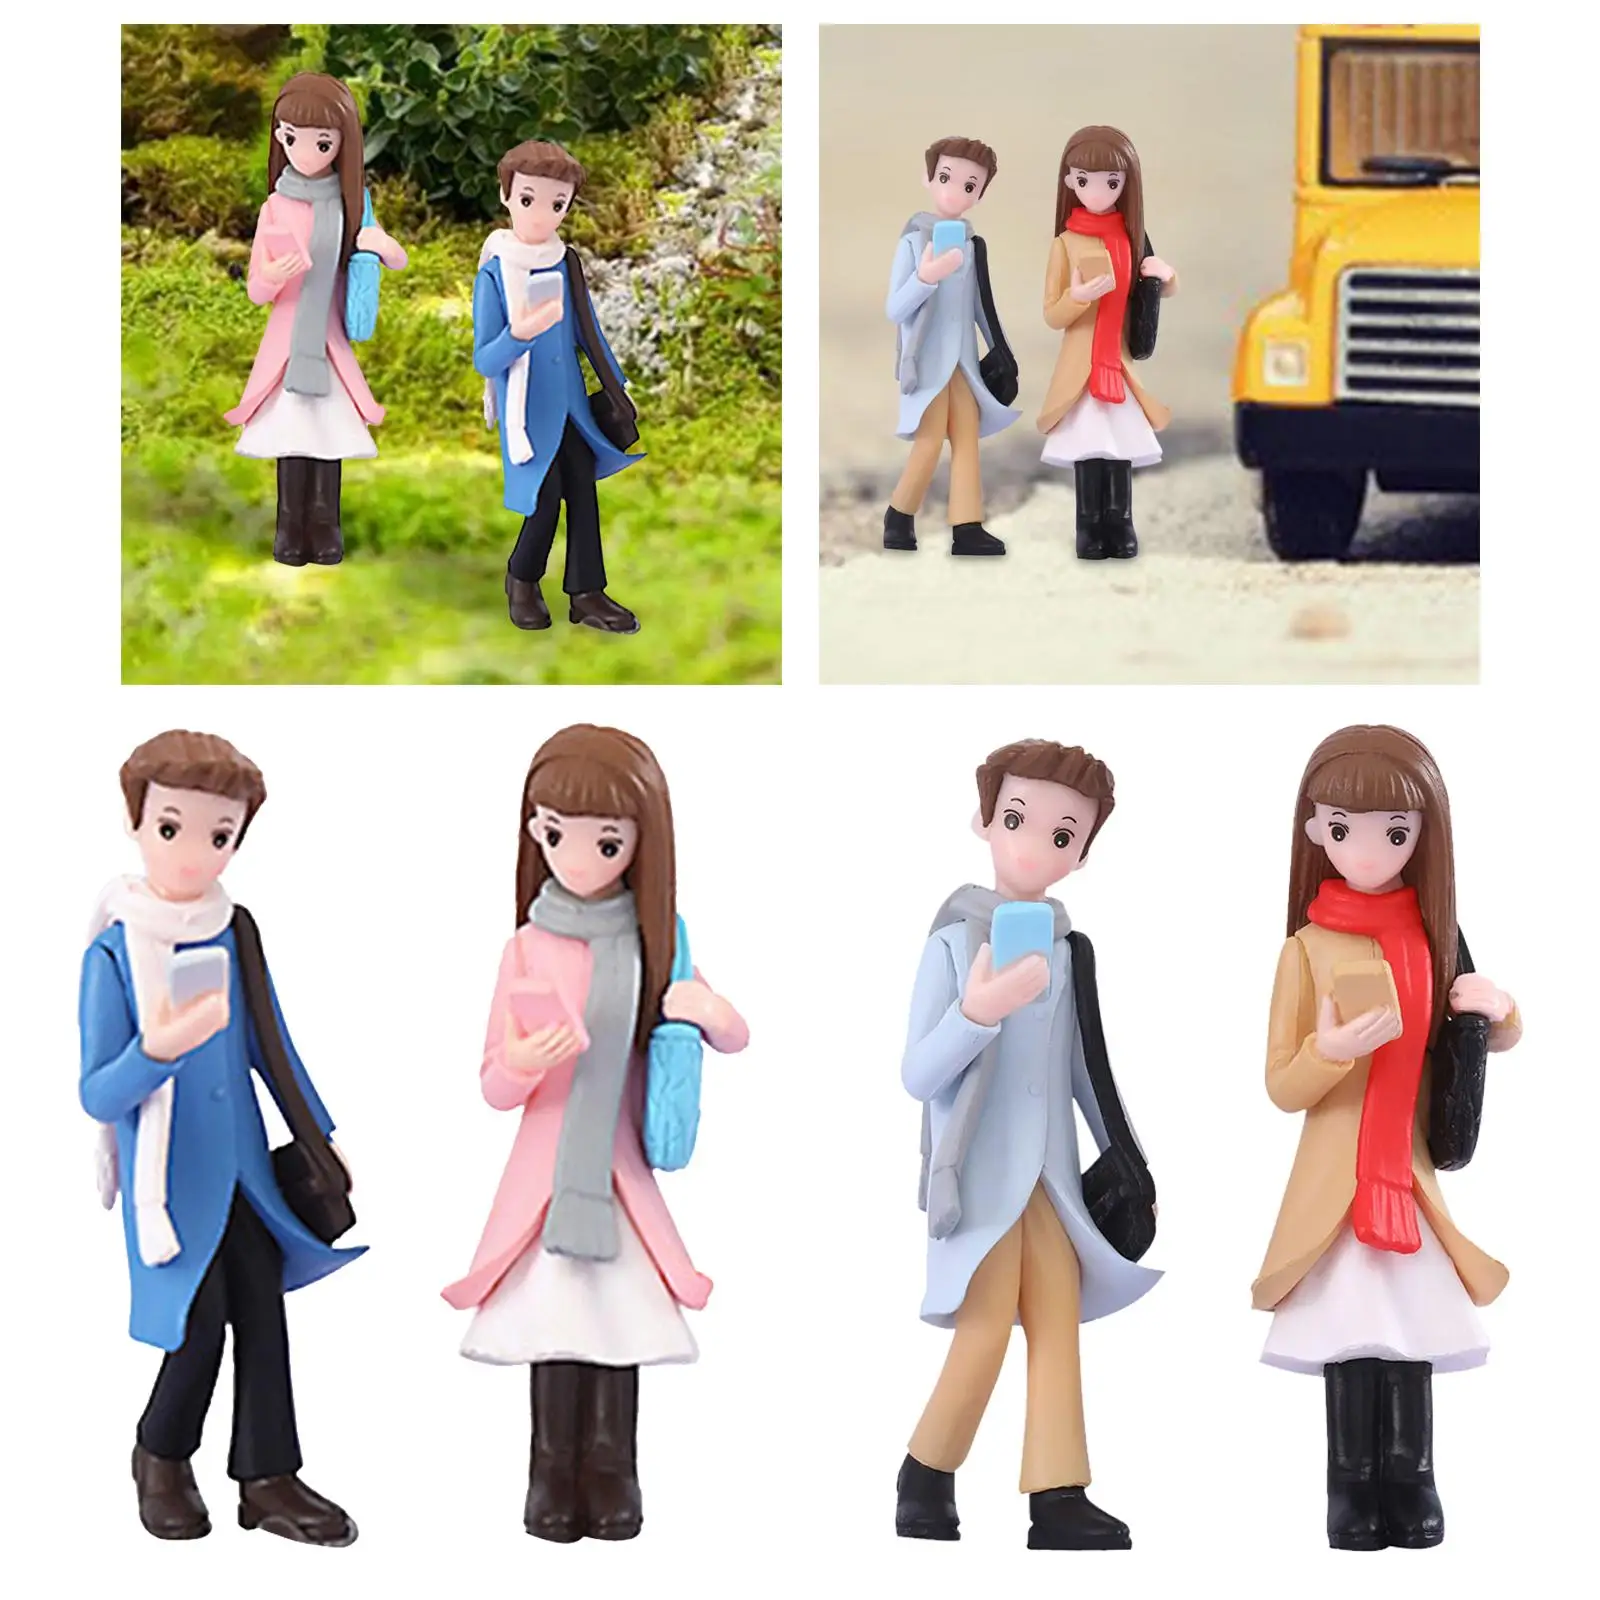 Phone Couple Collection People Figurines Set Sand Table Ornament for Photography Props Micro Landscapes Dollhouse Accessories